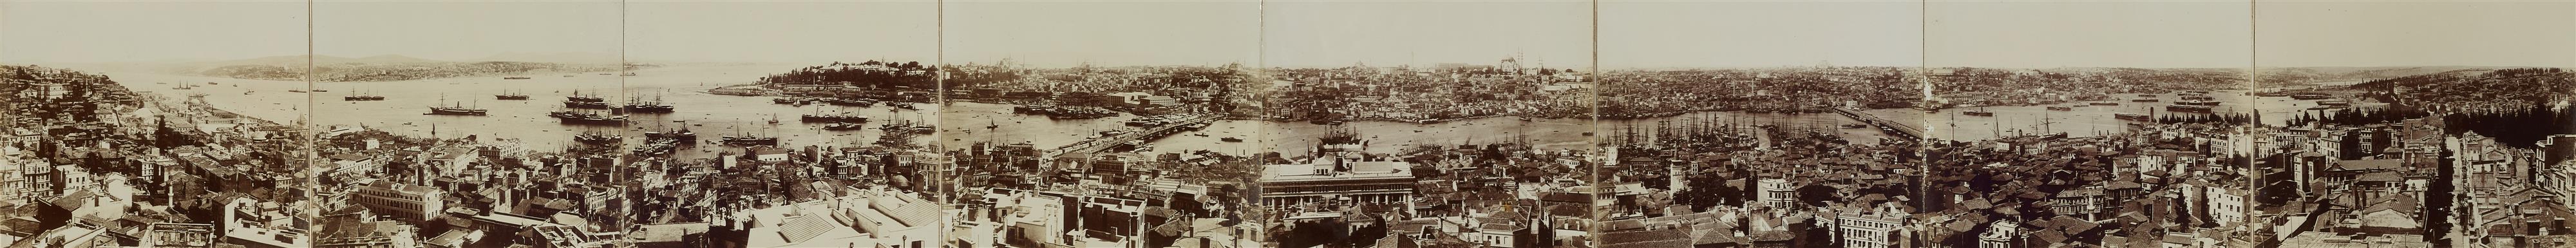 Jean Pascal Sébah - Panorama of Constantinople from the Galata Tower - image-1